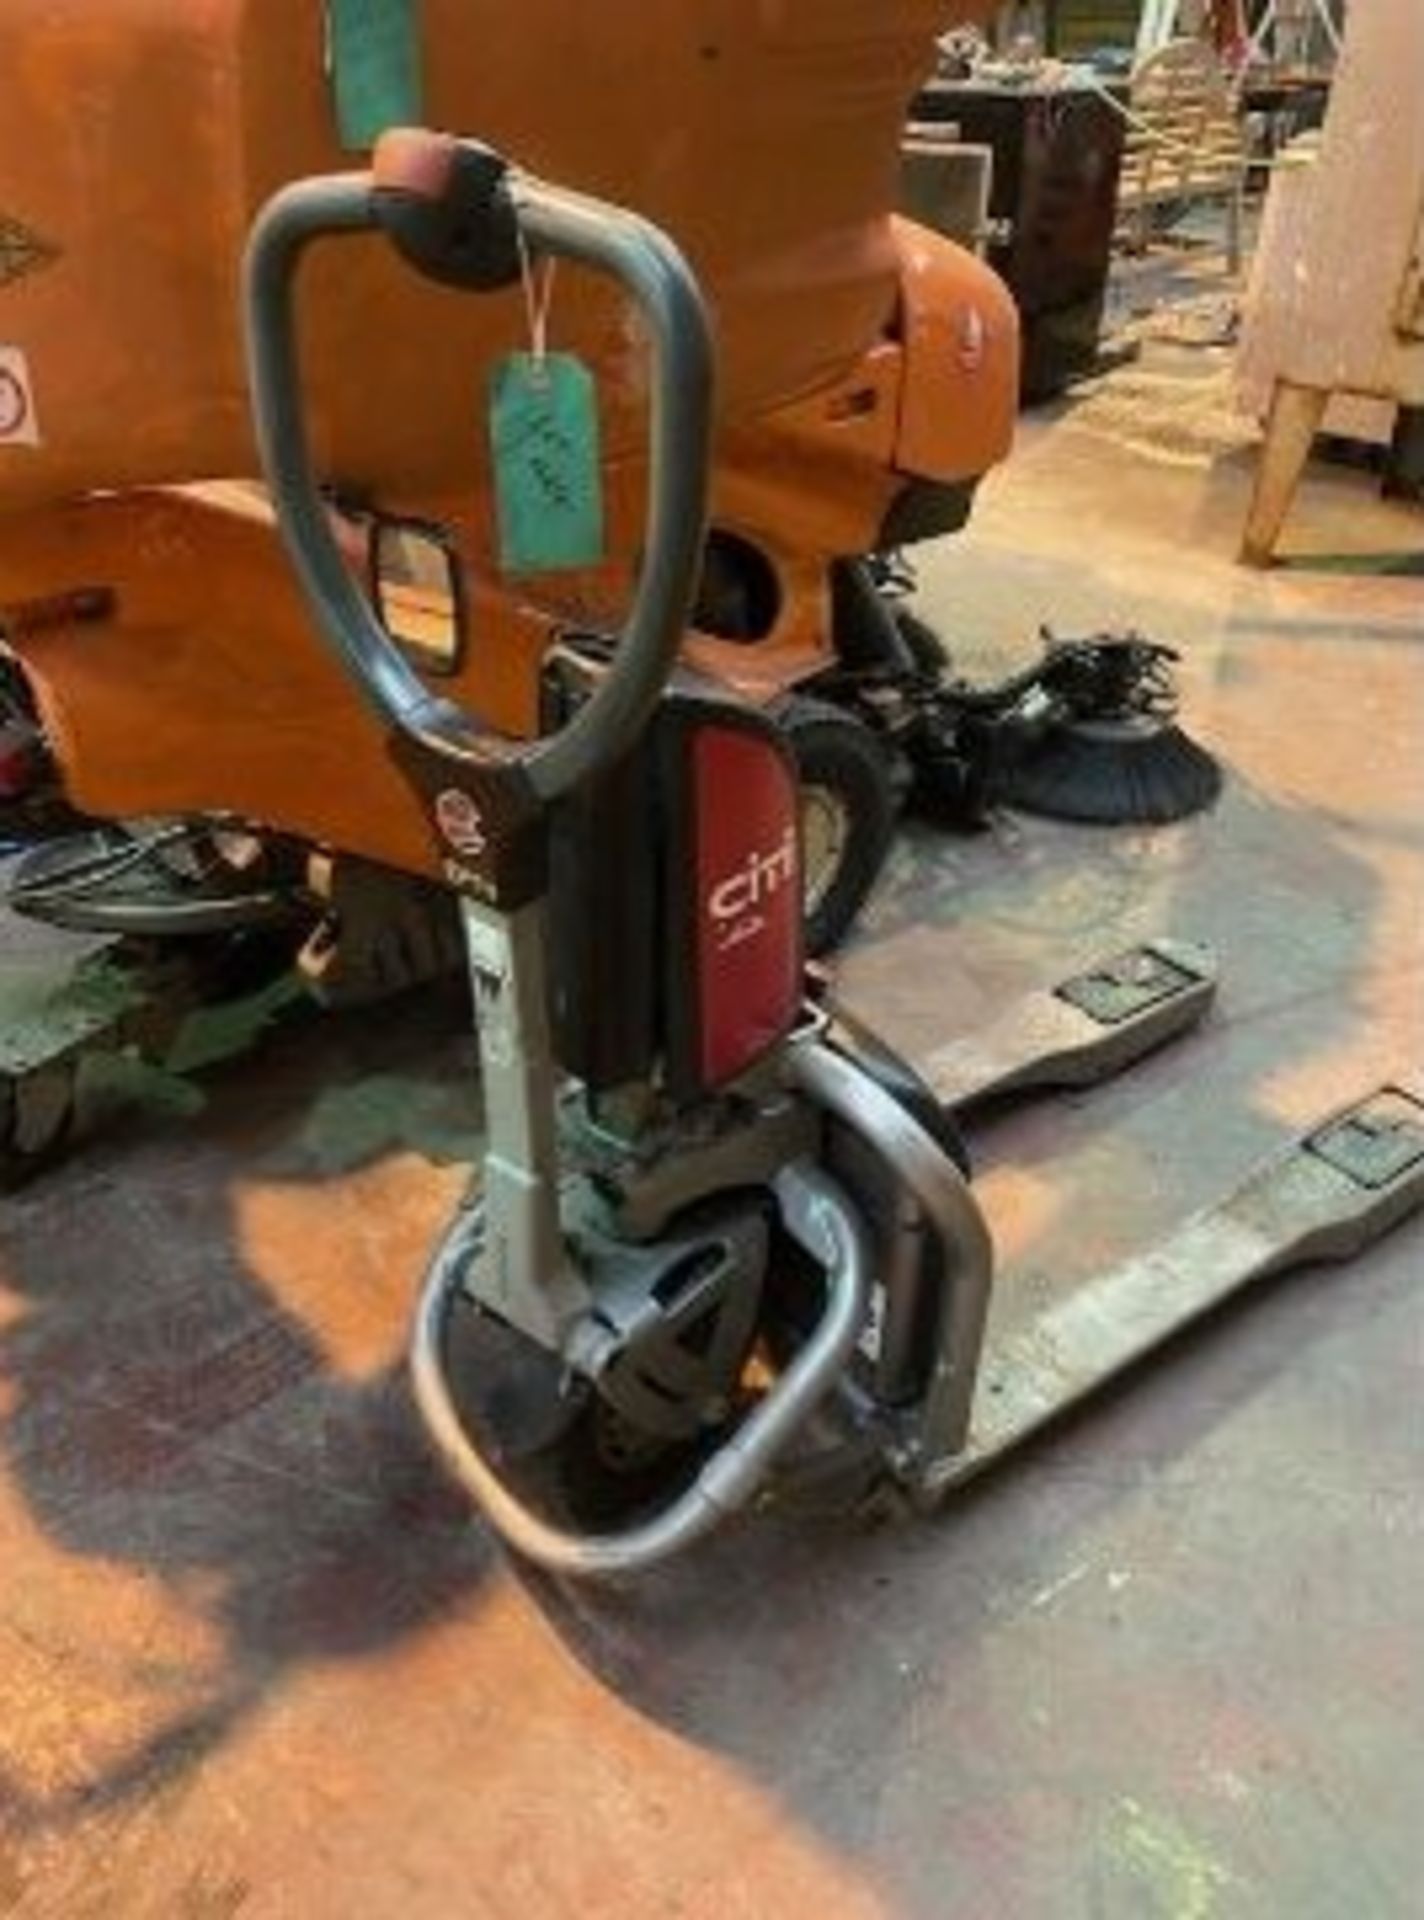 Linde City Pallet truck battery operated but no battery included - no reserve